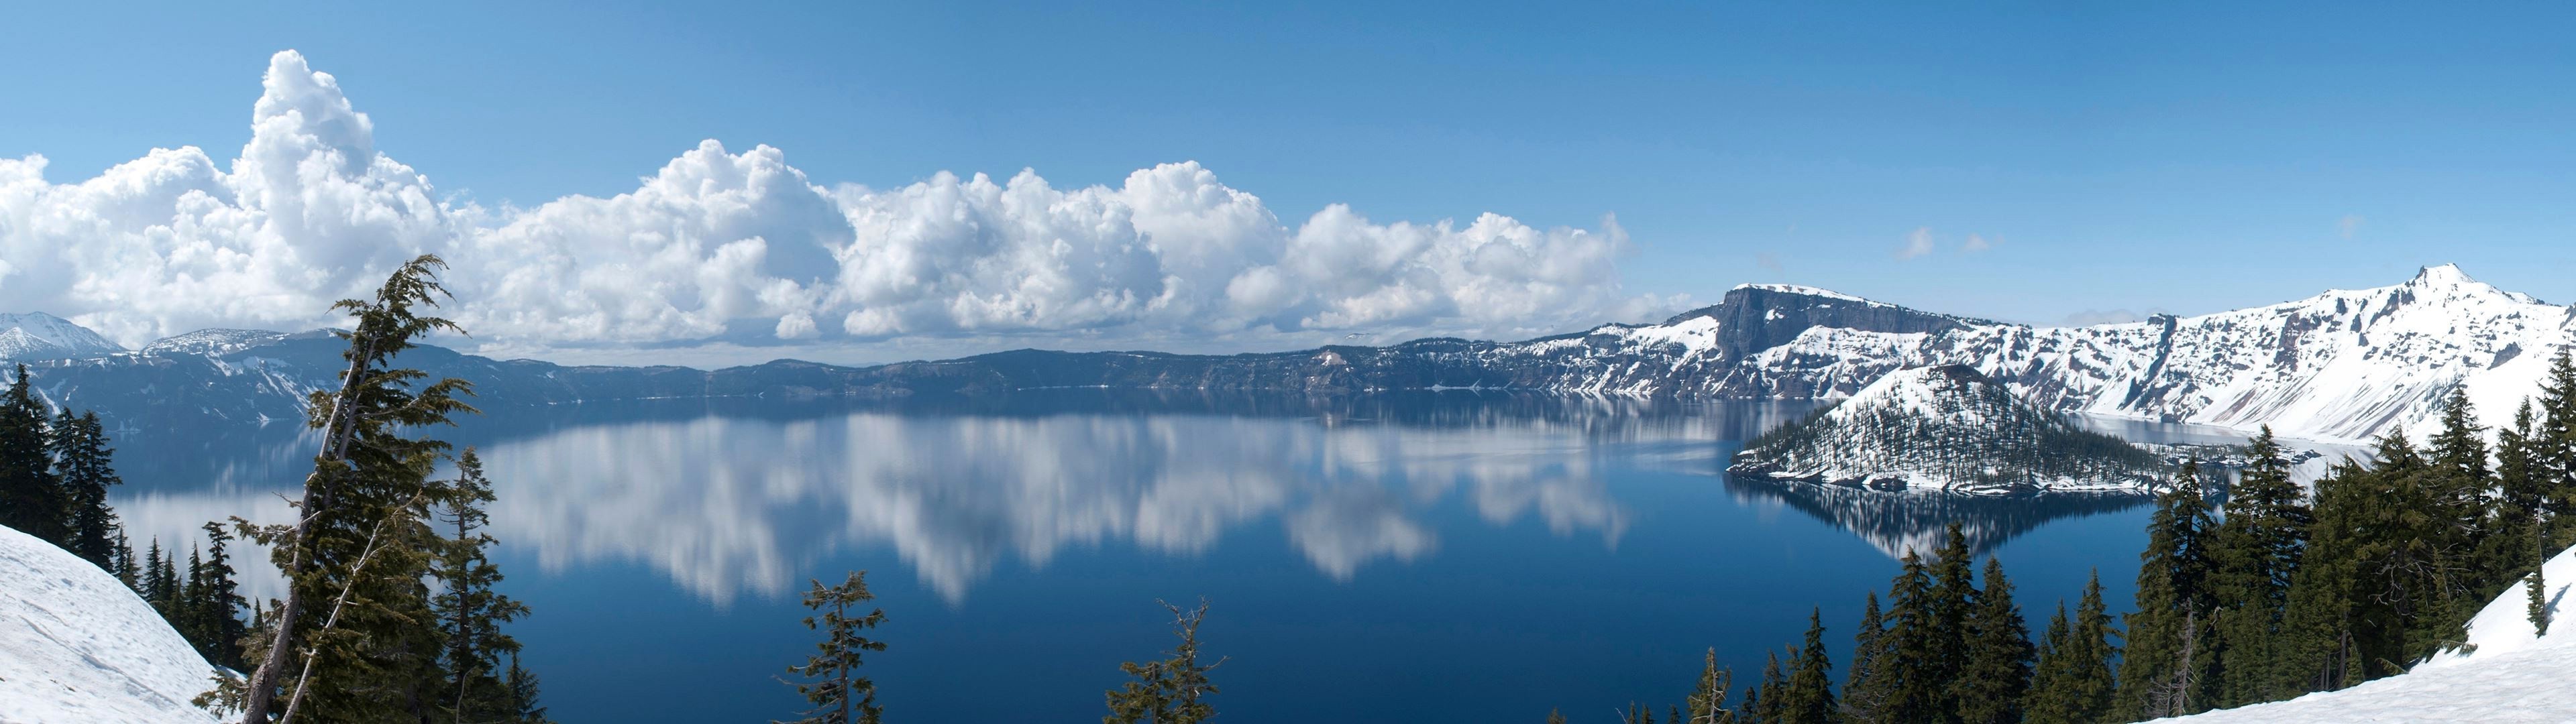 3840x1080 landscape, Lake, Crater Lake, Clouds, Reflection, Multiple Display, Snow  Wallpapers HD / Desktop and Mobile Backgrounds